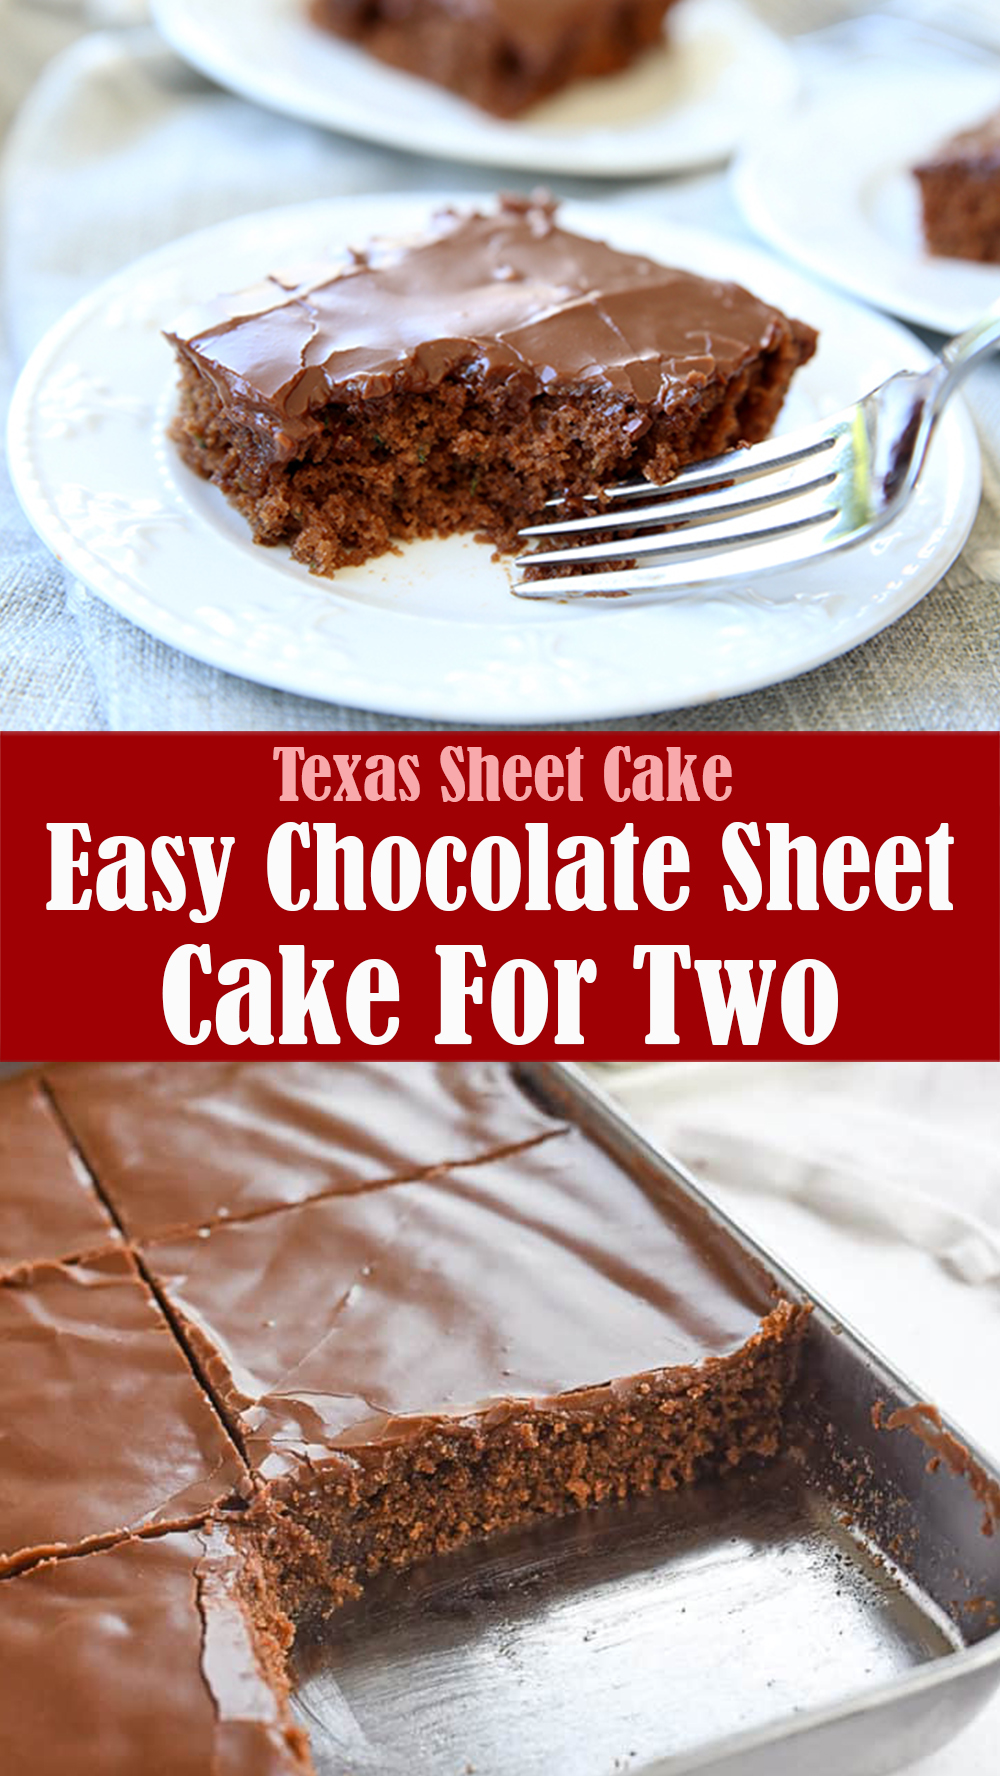 Chocolate Sheet Cake For Two